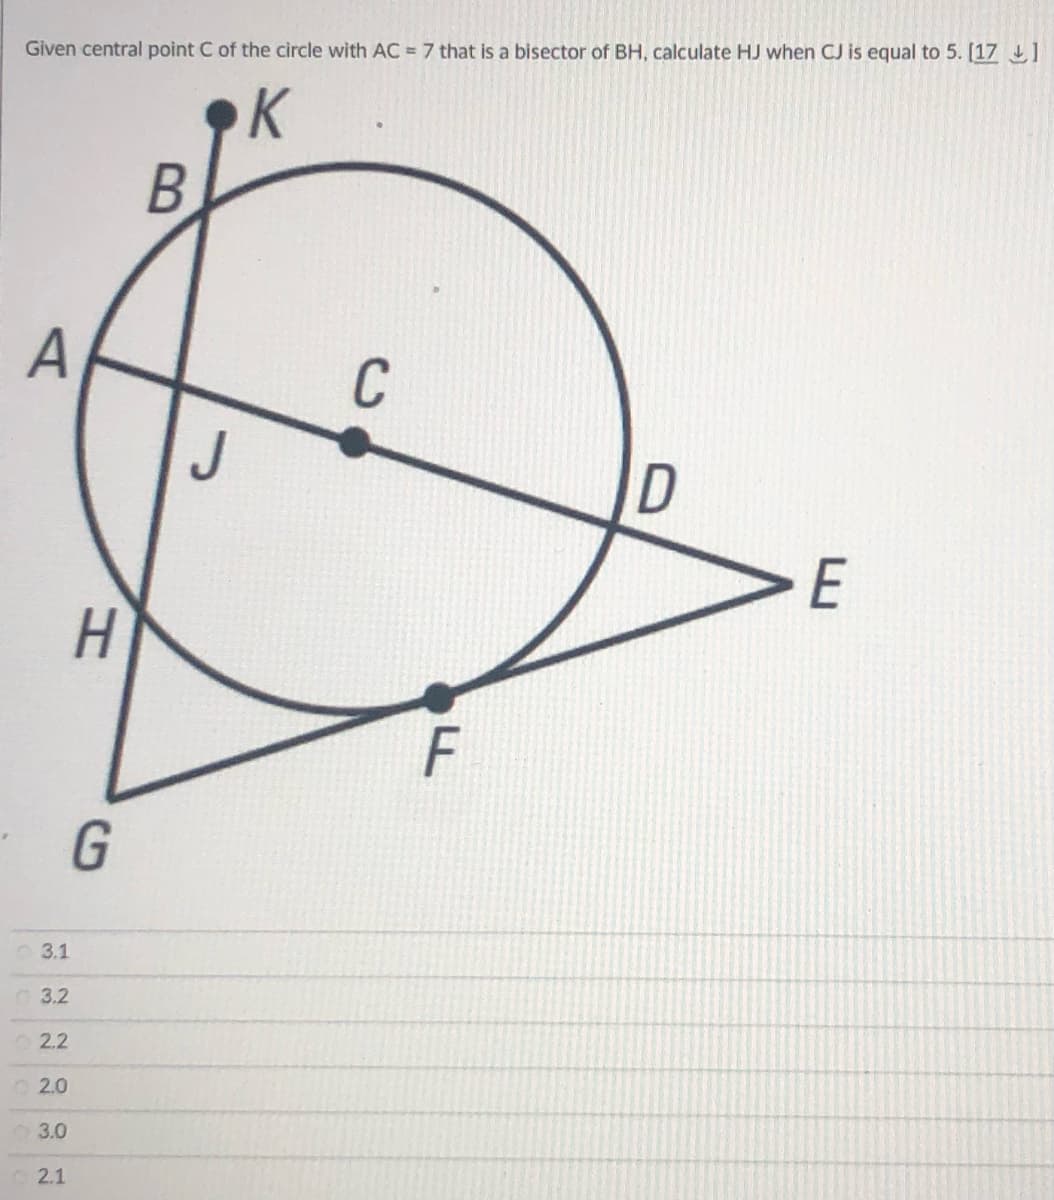 Given central point C of the circle with AC = 7 that is a bisector of BH, calculate HJ when CJ is equal to 5. [17 1
K
A
C
E
G
3.1
3.2
2.2
2.0
3.0
2.1
F.
